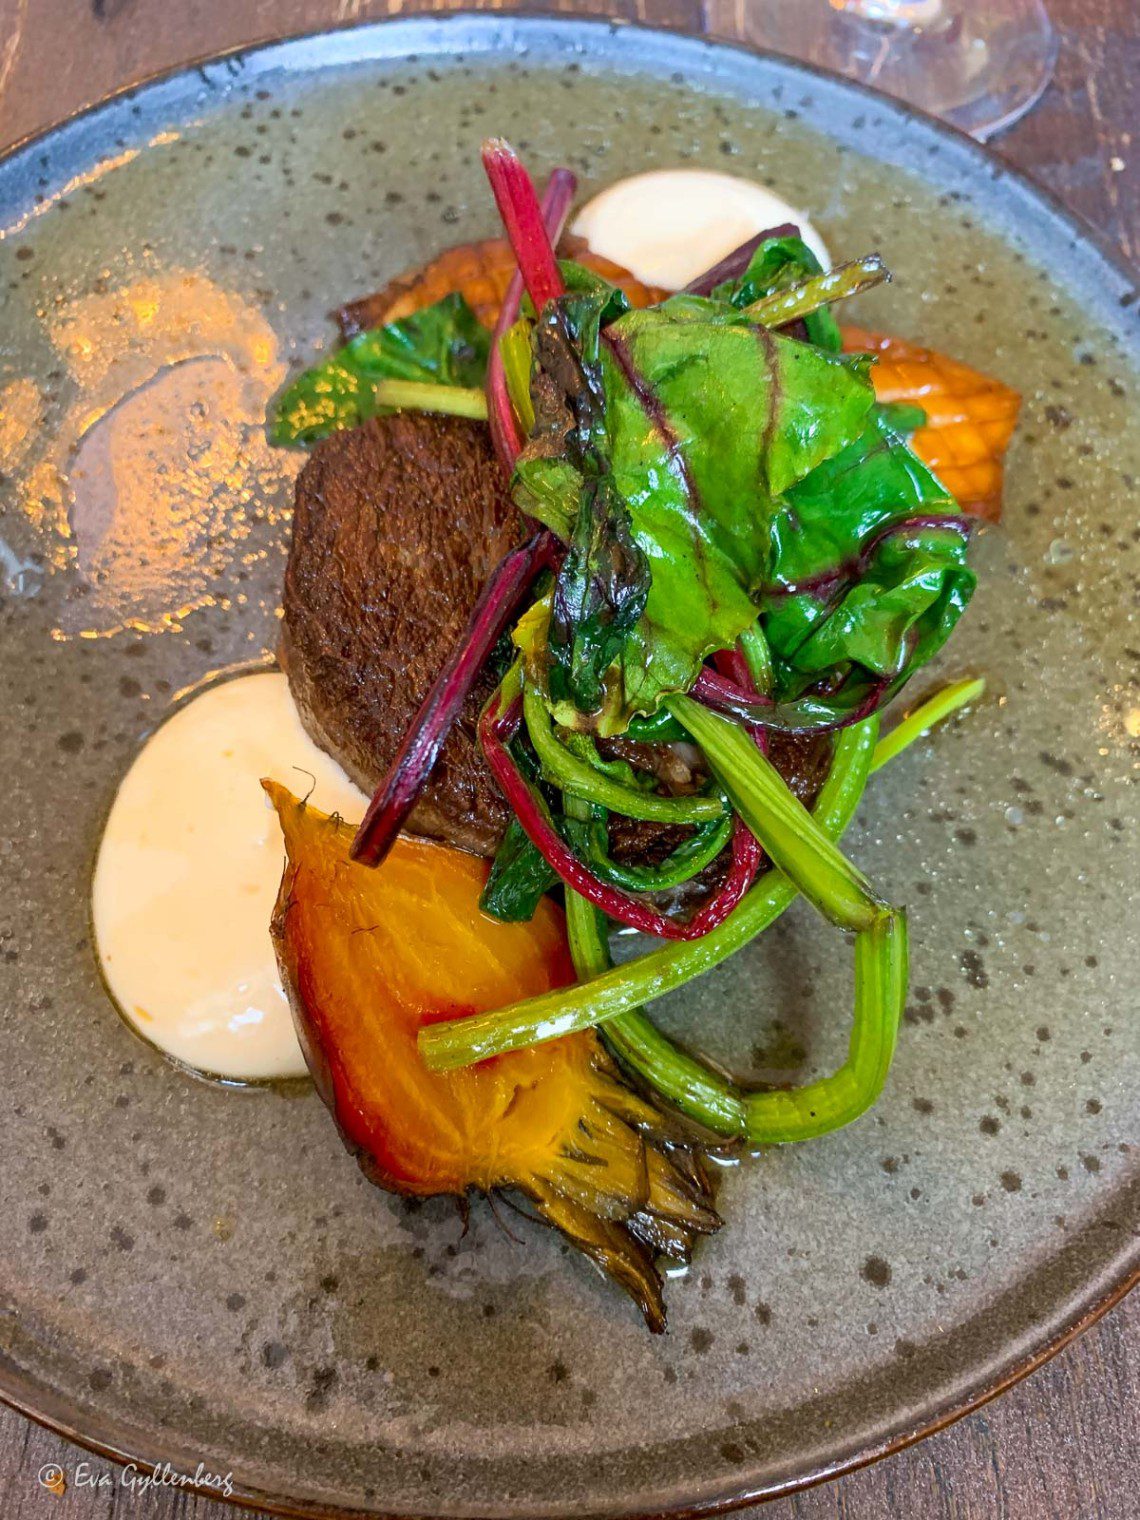 Piece of meat with oven-roasted vegetables at a restaurant in Lund